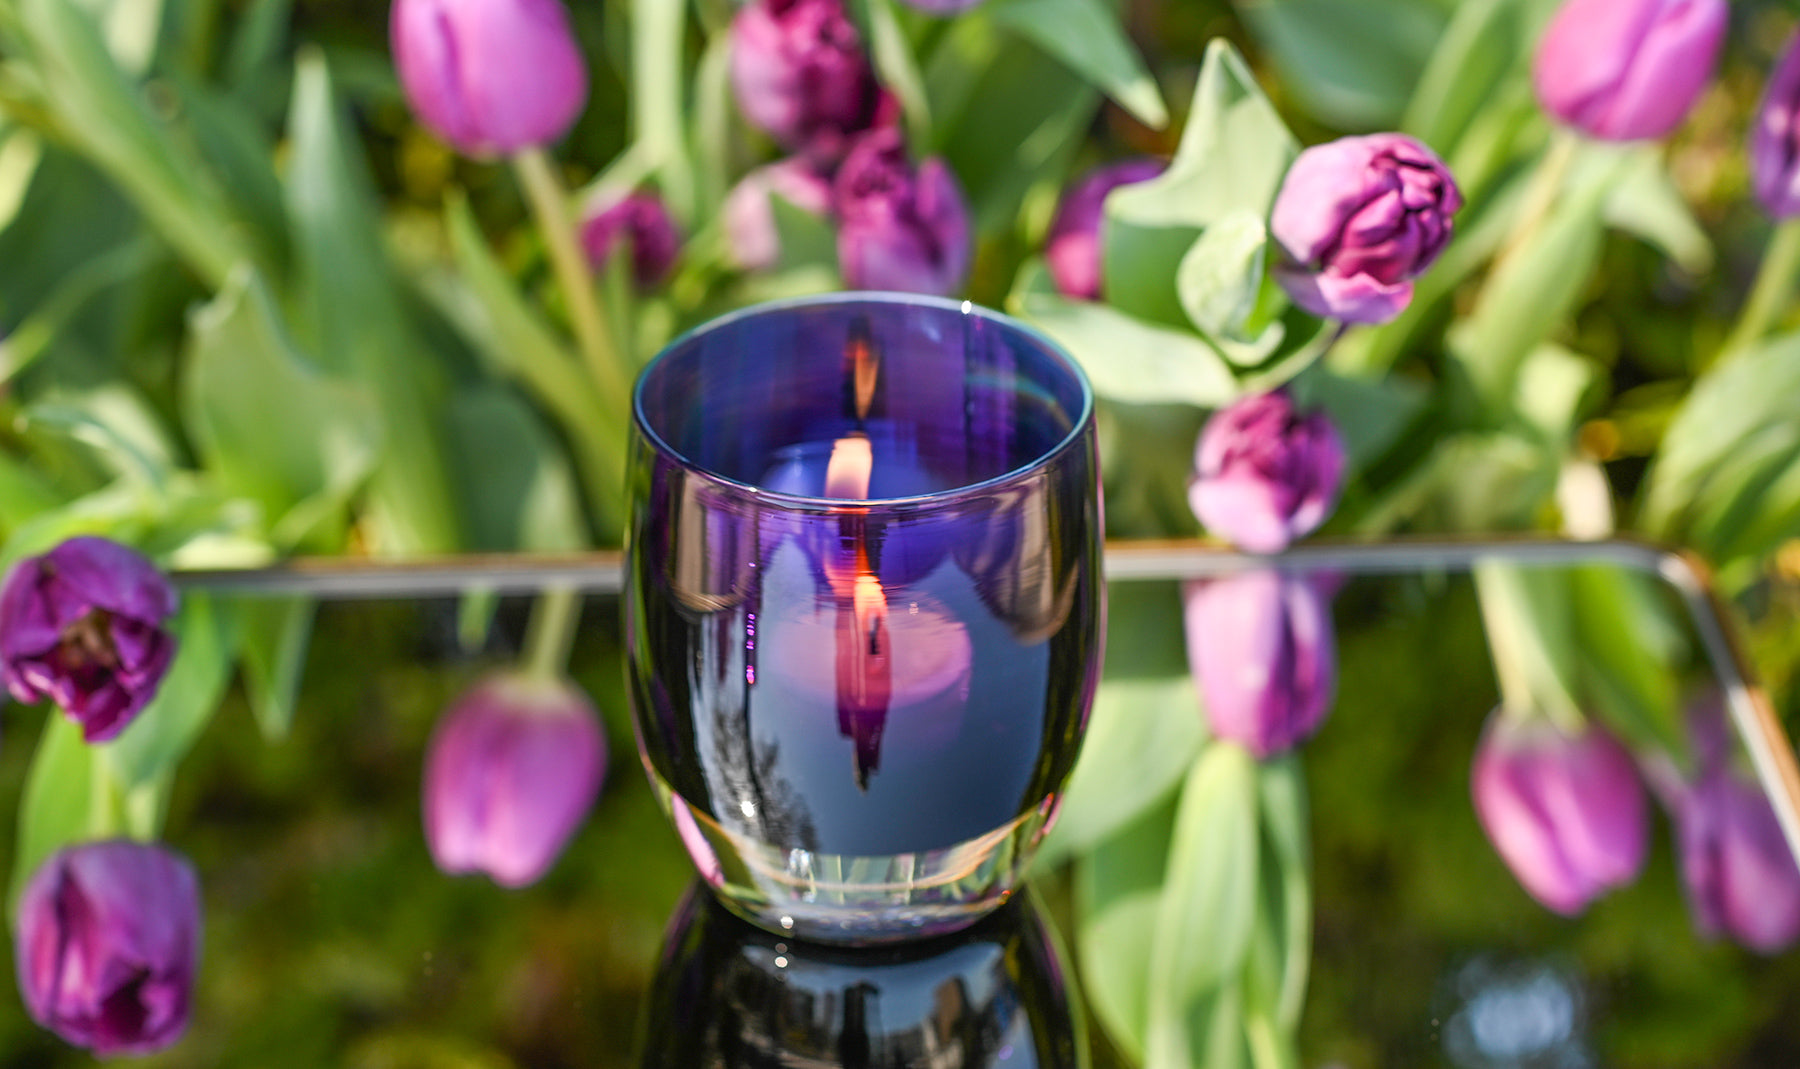 tulip, beautiful deep purple hand-blown glass votive with an iridescent inside sitting on a table in a field of tulips.